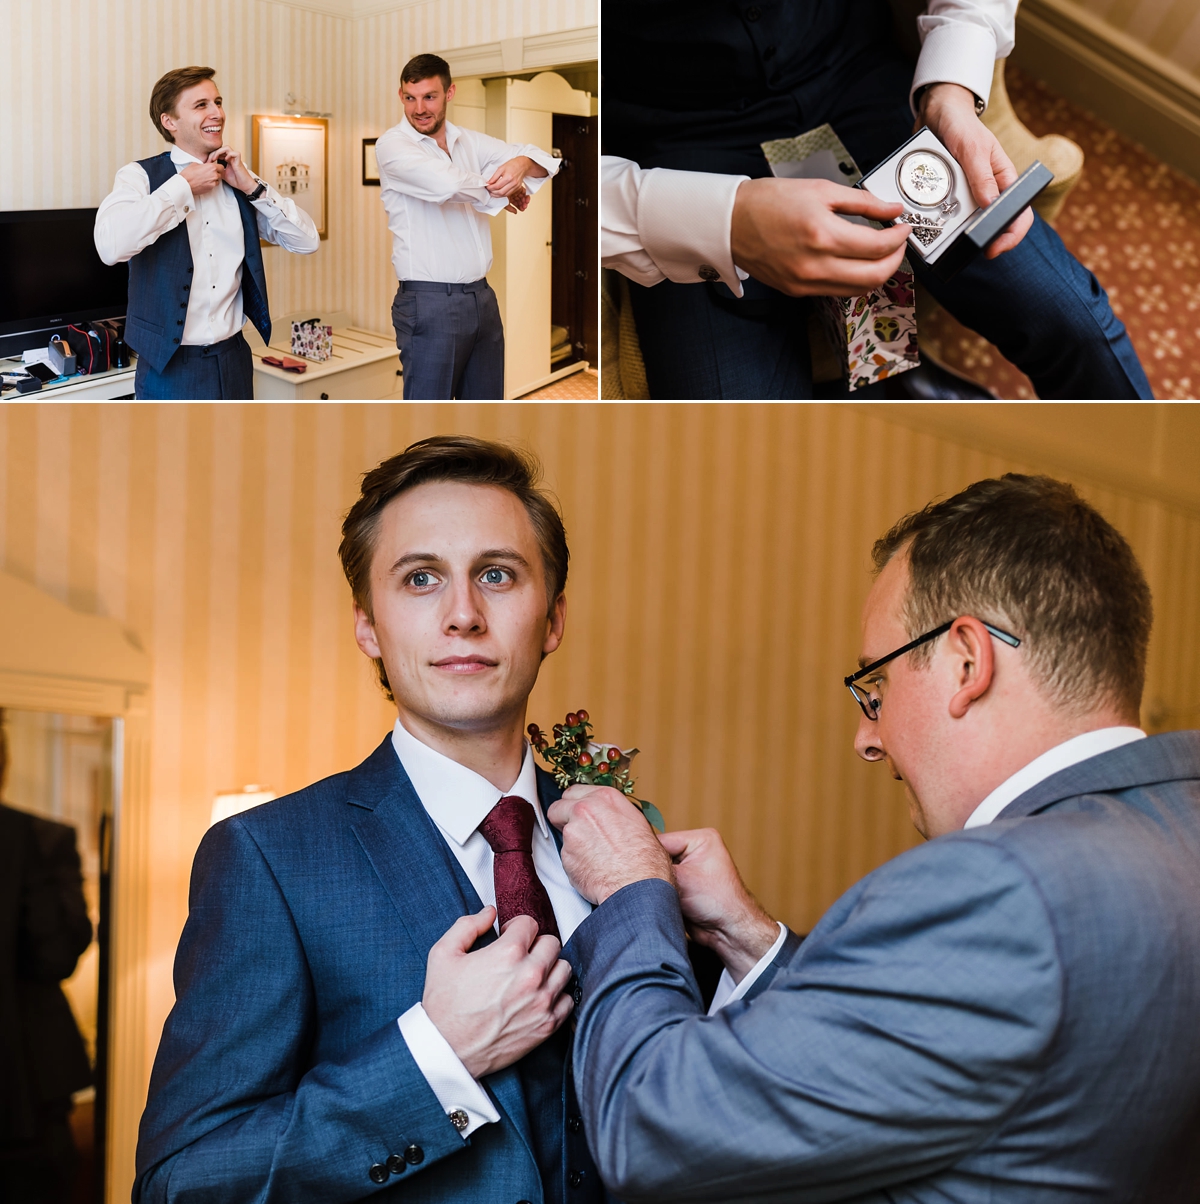 7 Groom in a Ted Baker grey wedding suit. Images by Su Ann Simon